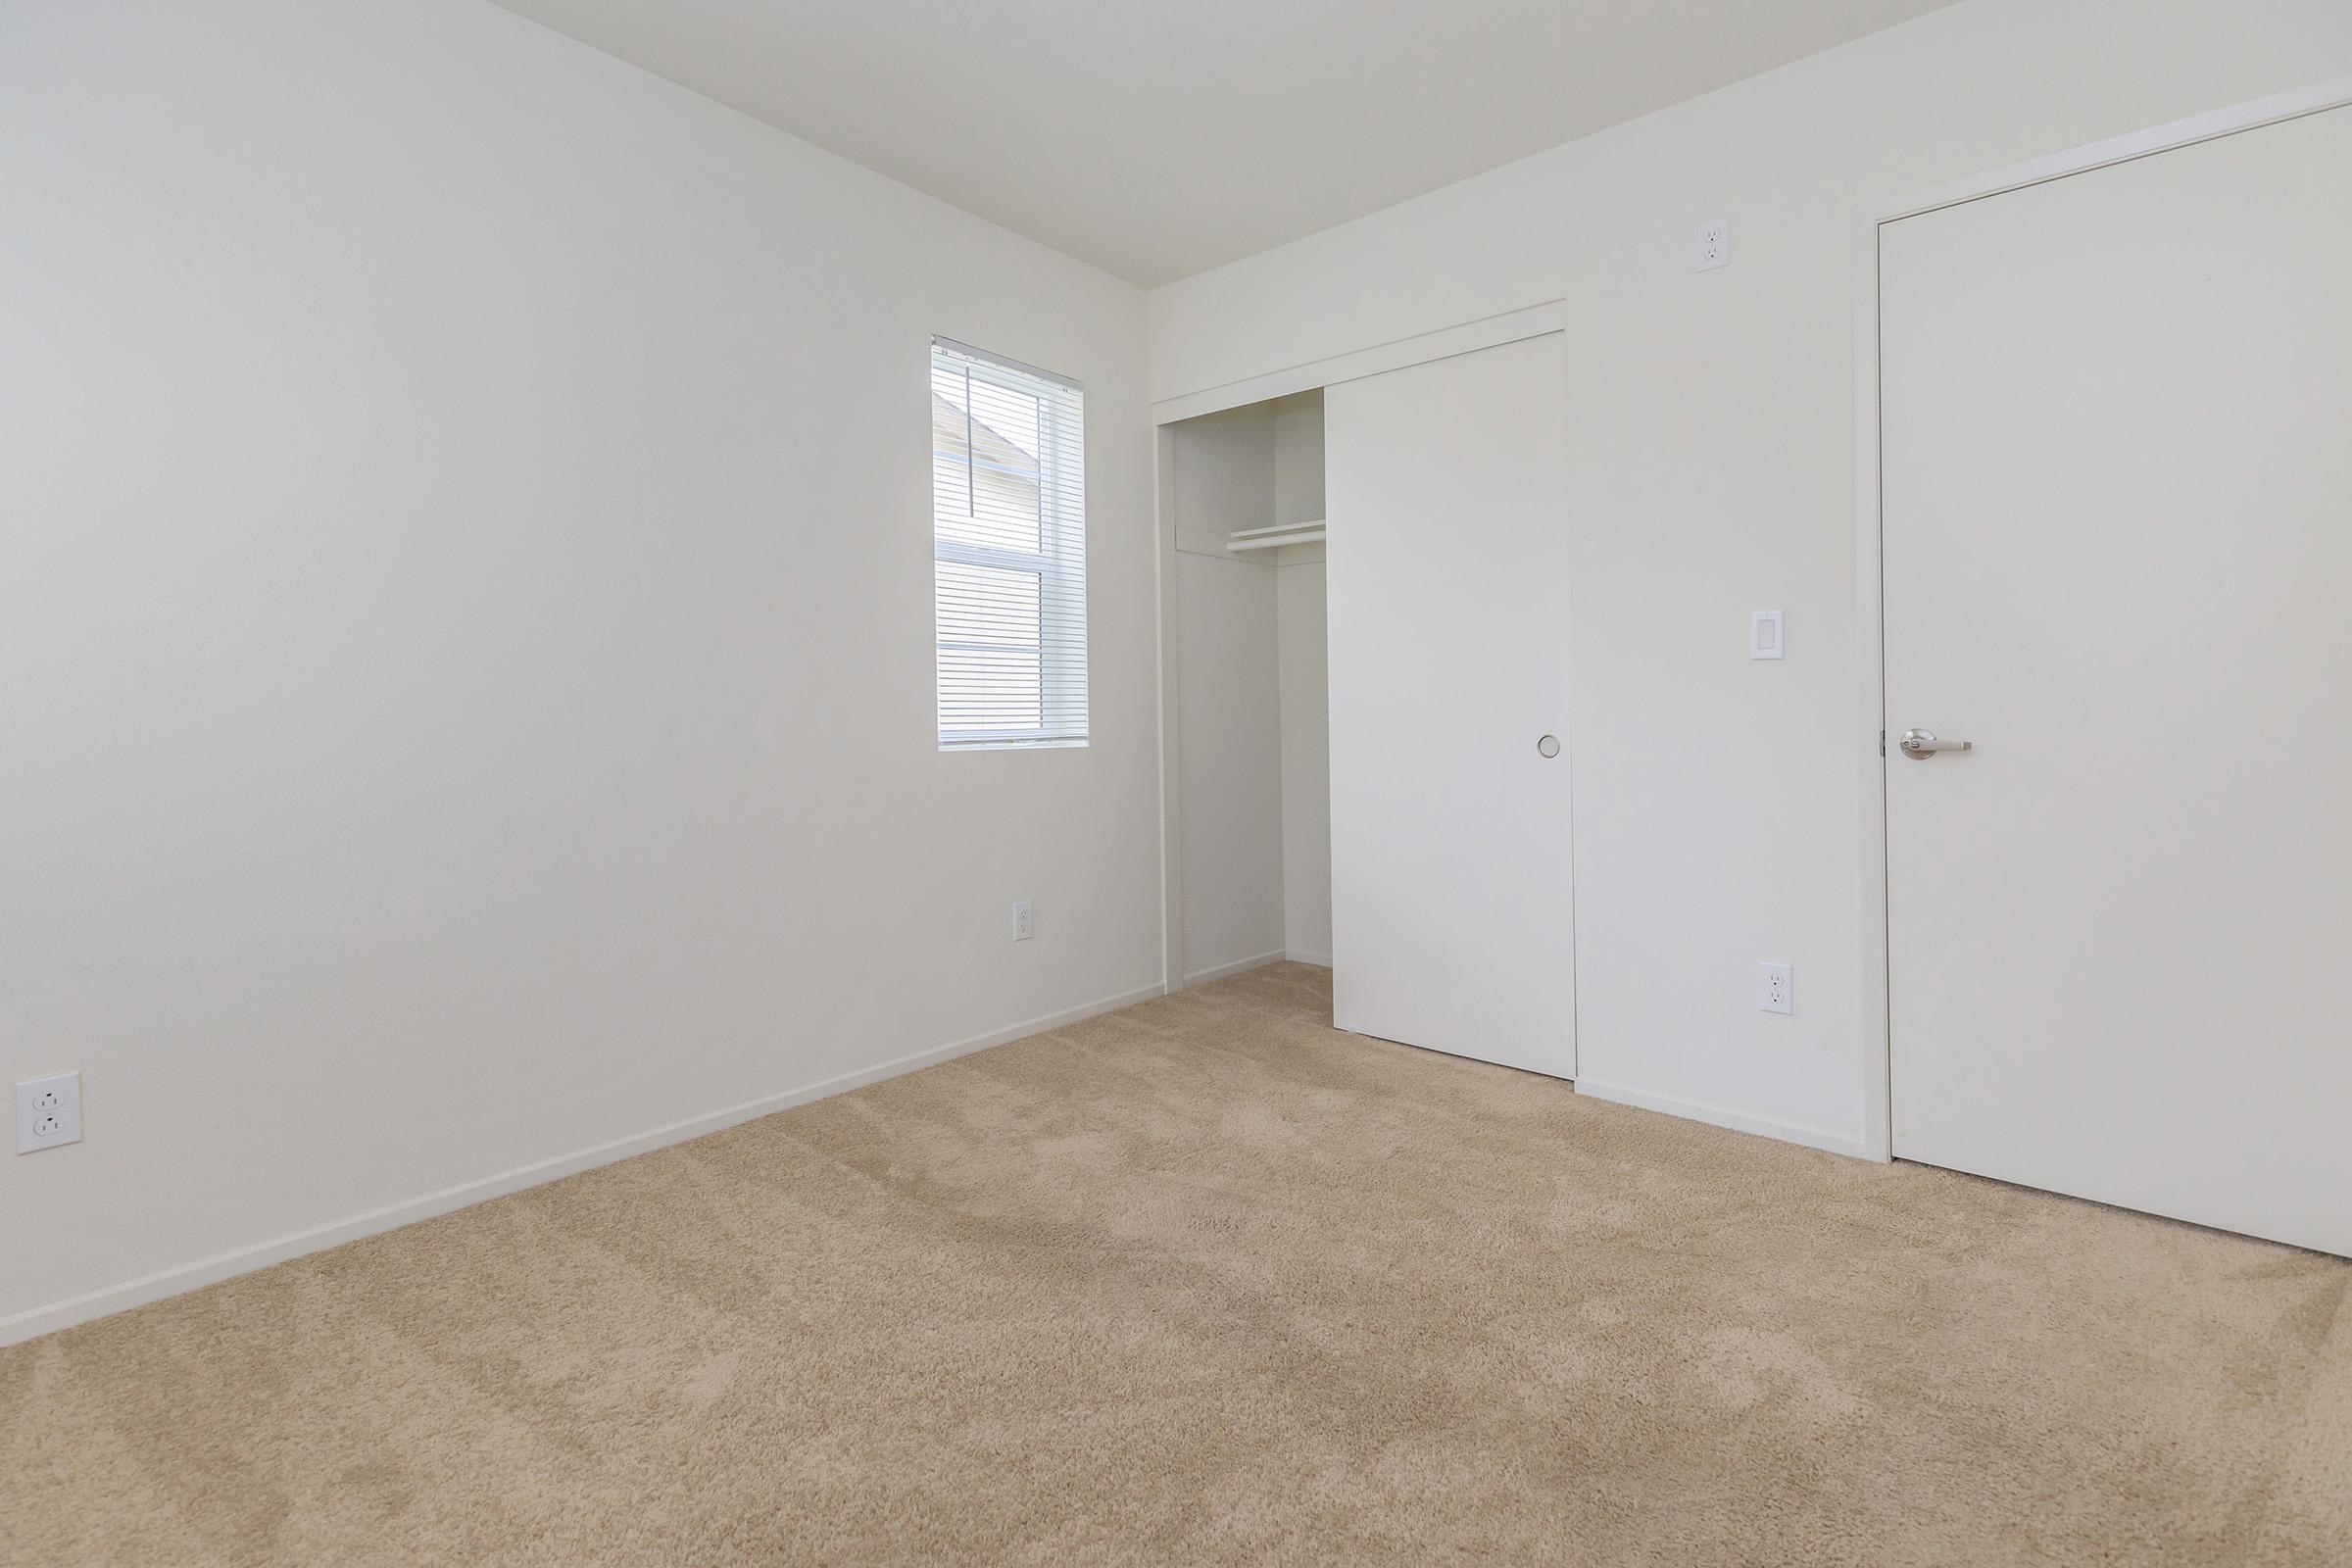 Vacant bedroom with a closet